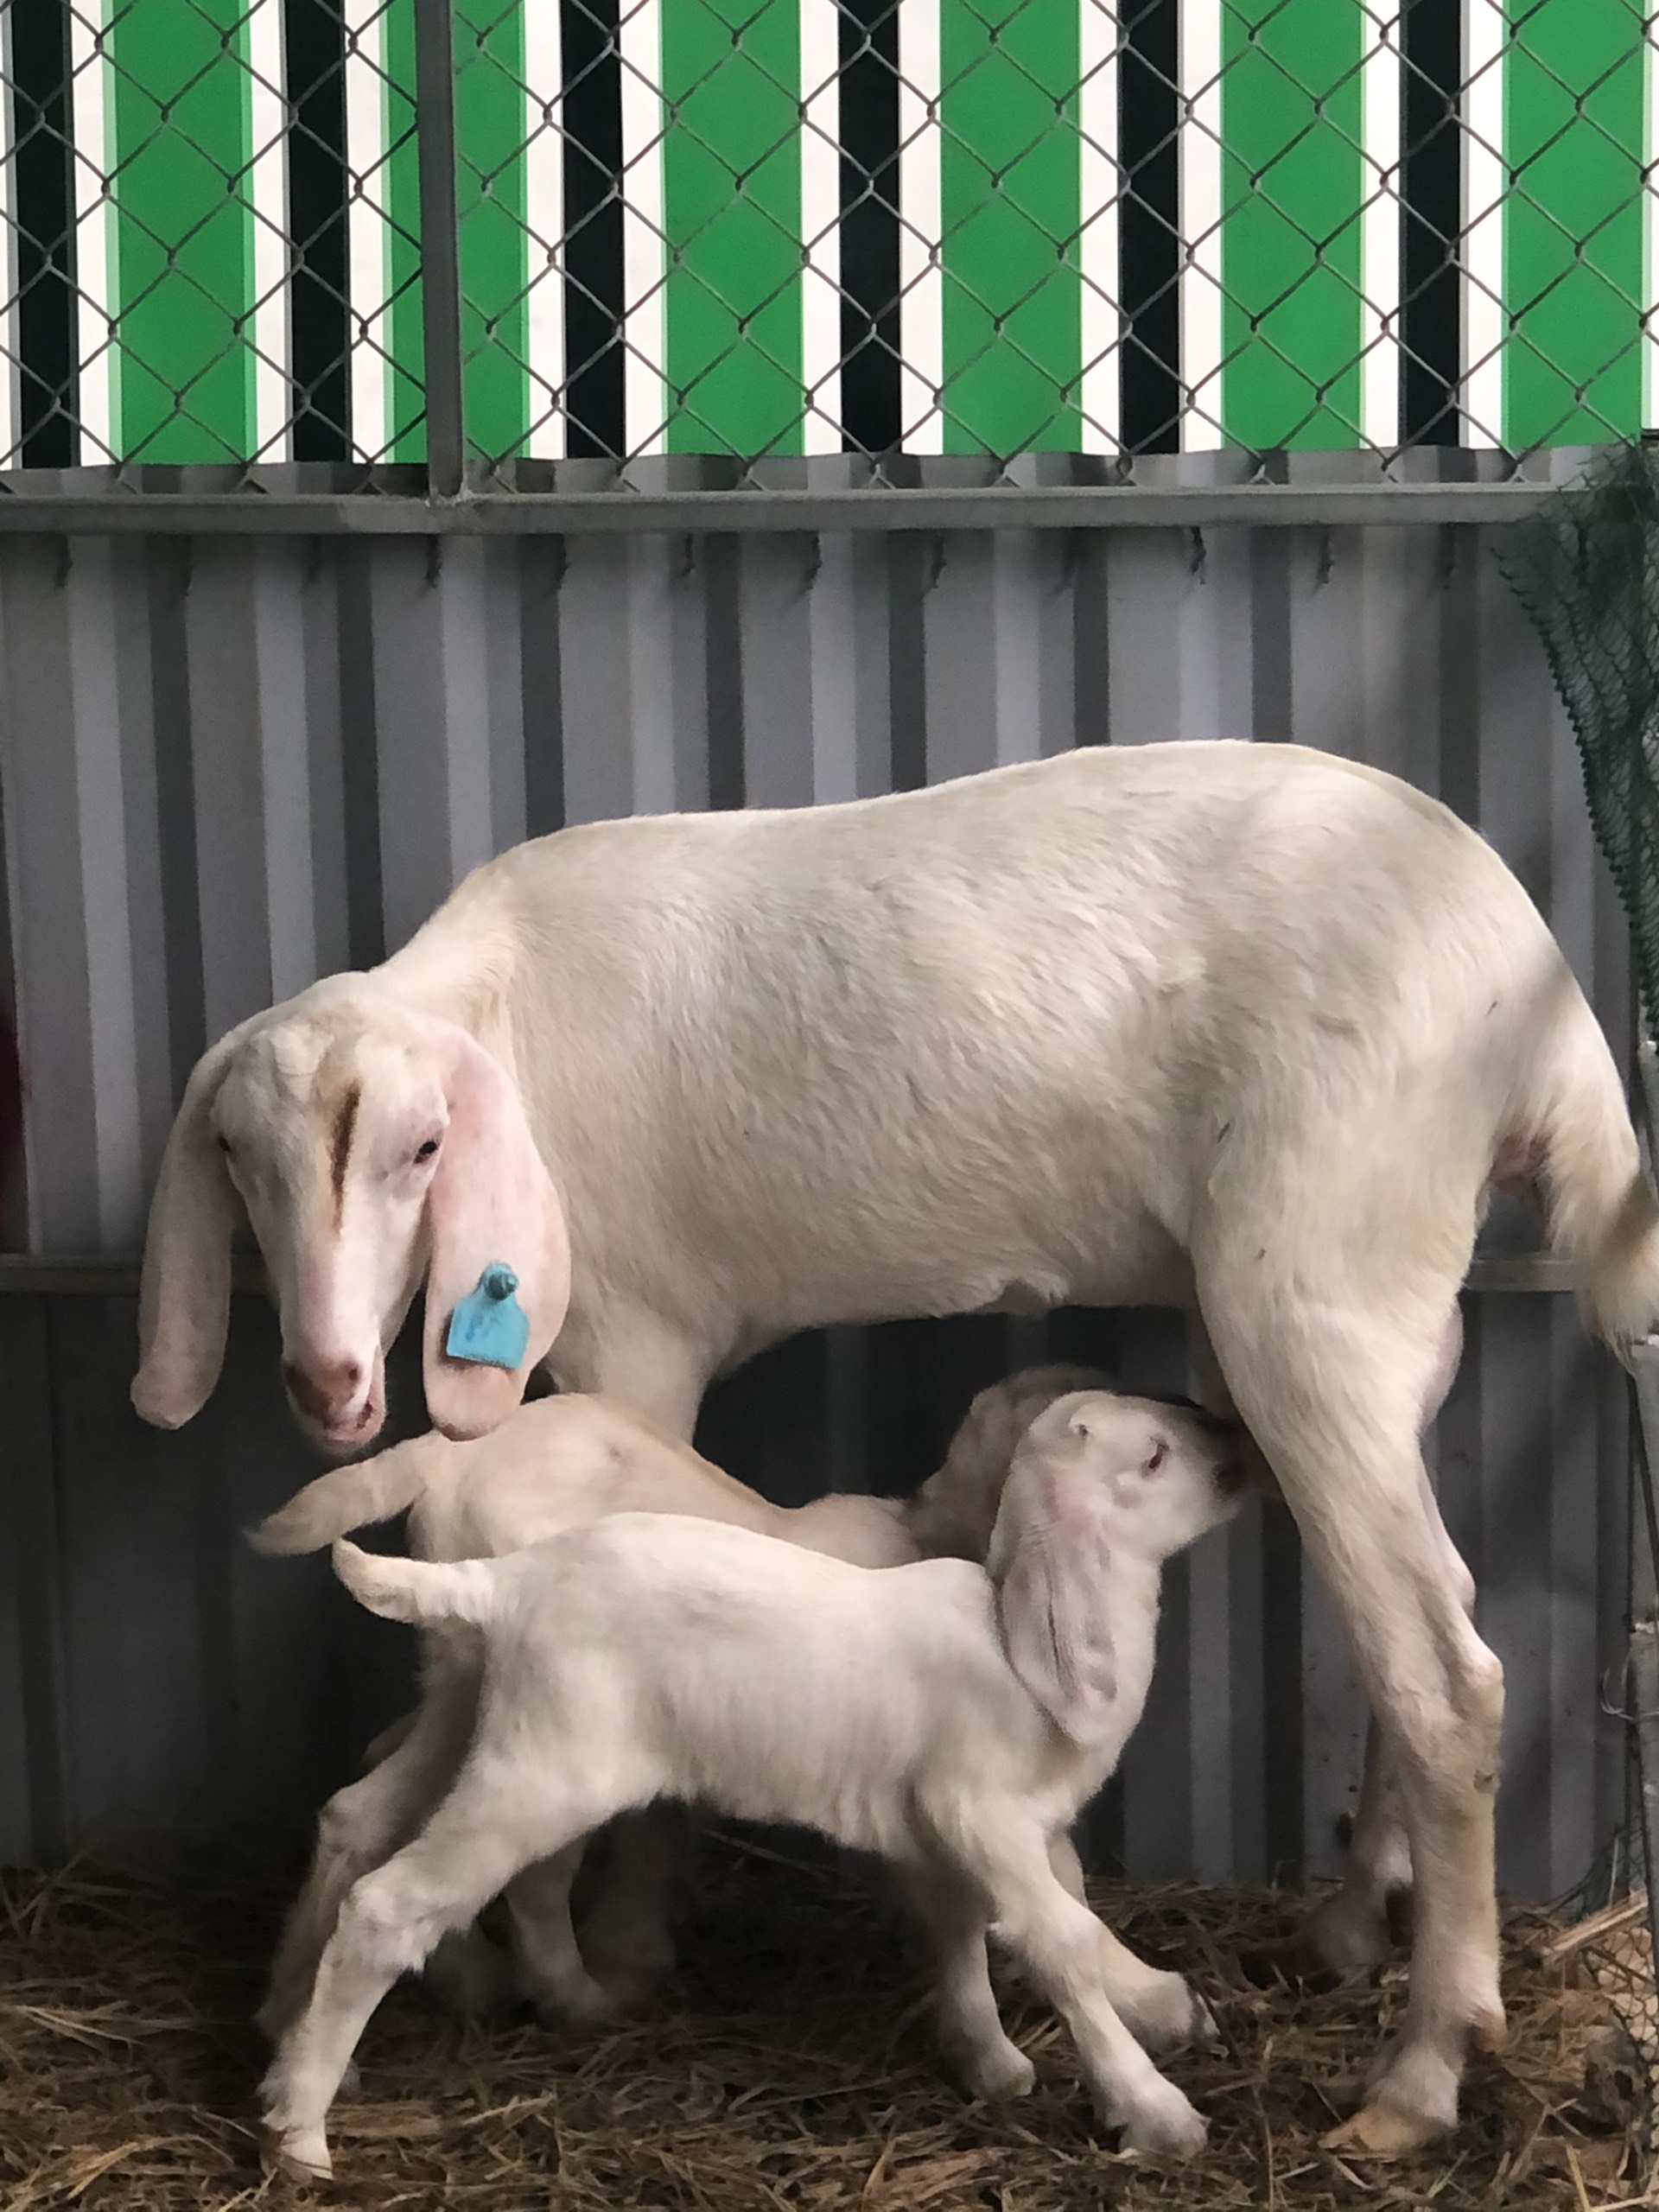 SOME COMMON DISEASES IN BABY GOATS AT THE TIME OF THE SEASON